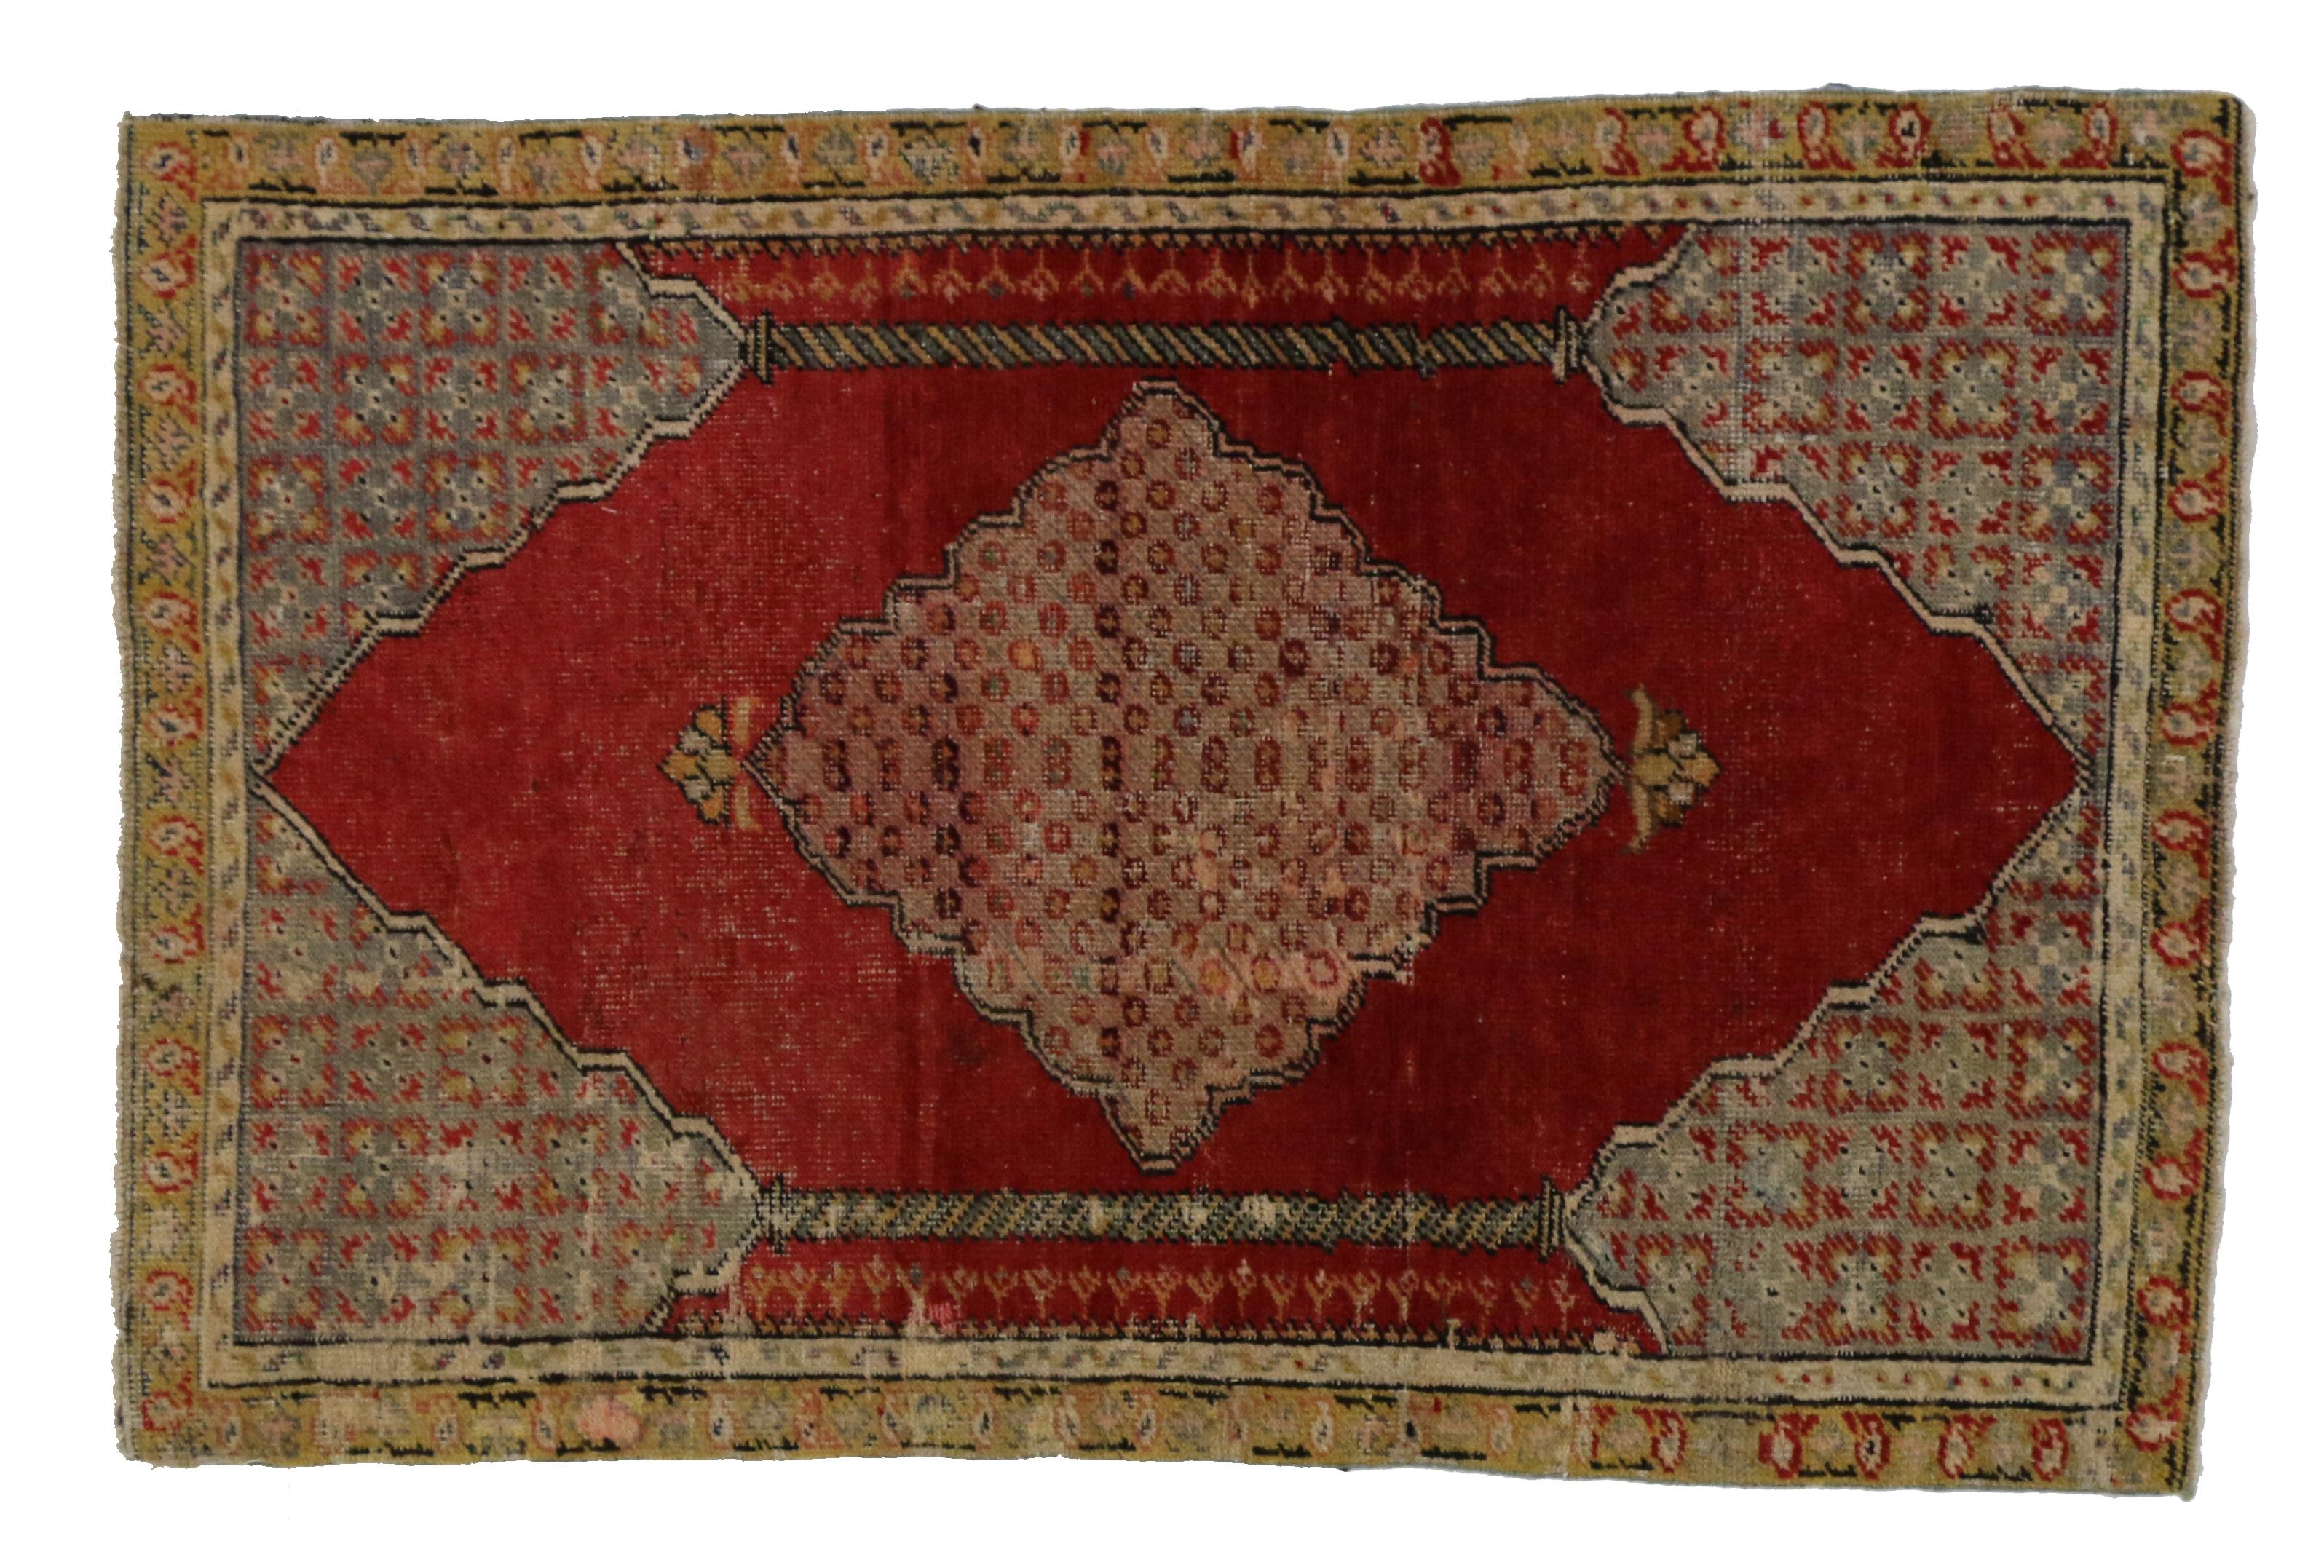 Vintage Turkish Oushak Accent Rug, Entry or Foyer Rug with Manor House Style In Good Condition For Sale In Dallas, TX